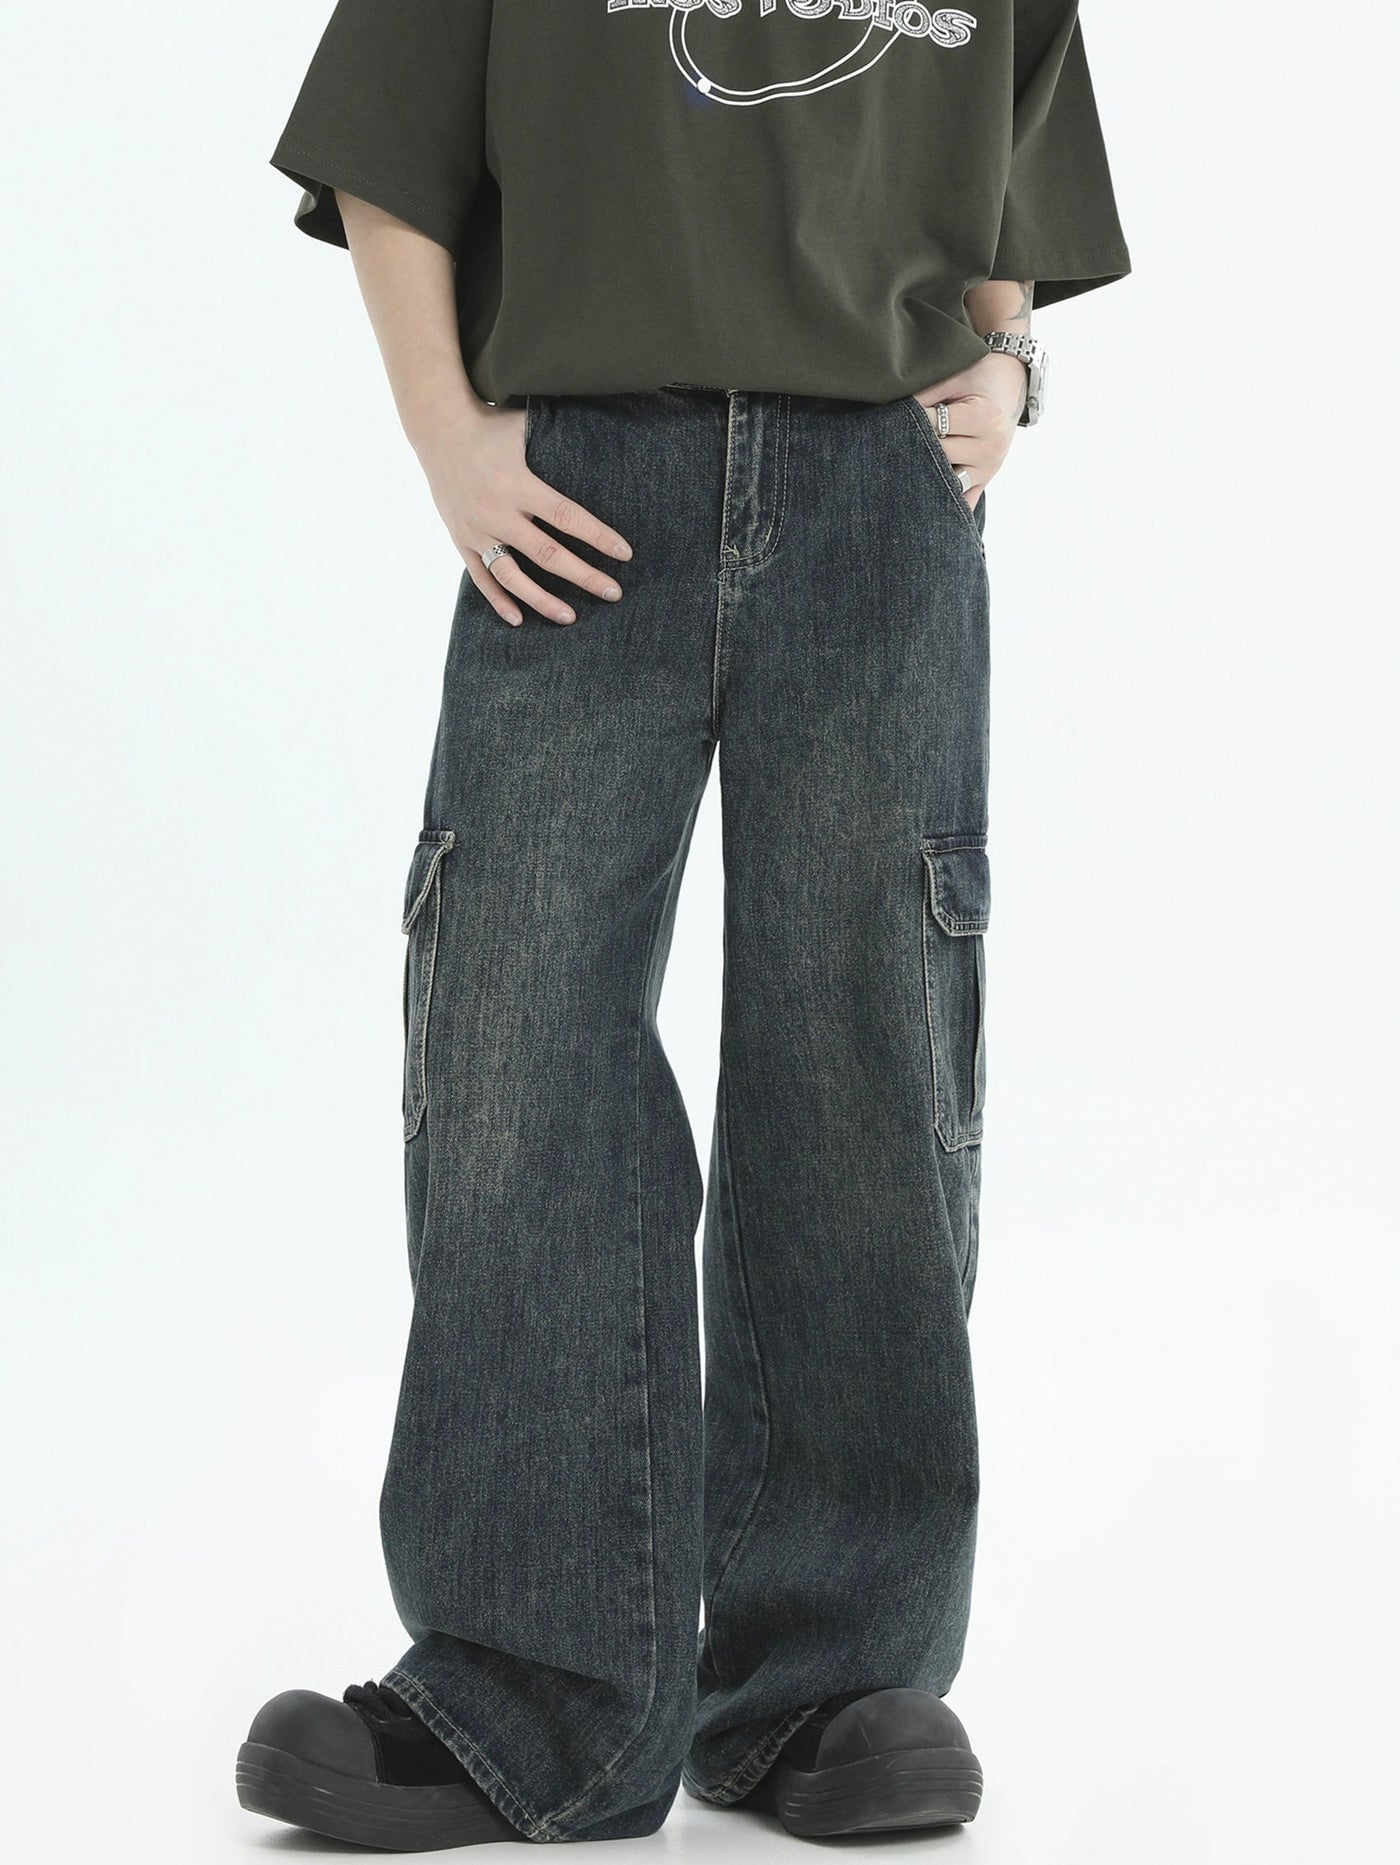 Classic Cargo Style Jeans Korean Street Fashion Jeans By INS Korea Shop Online at OH Vault